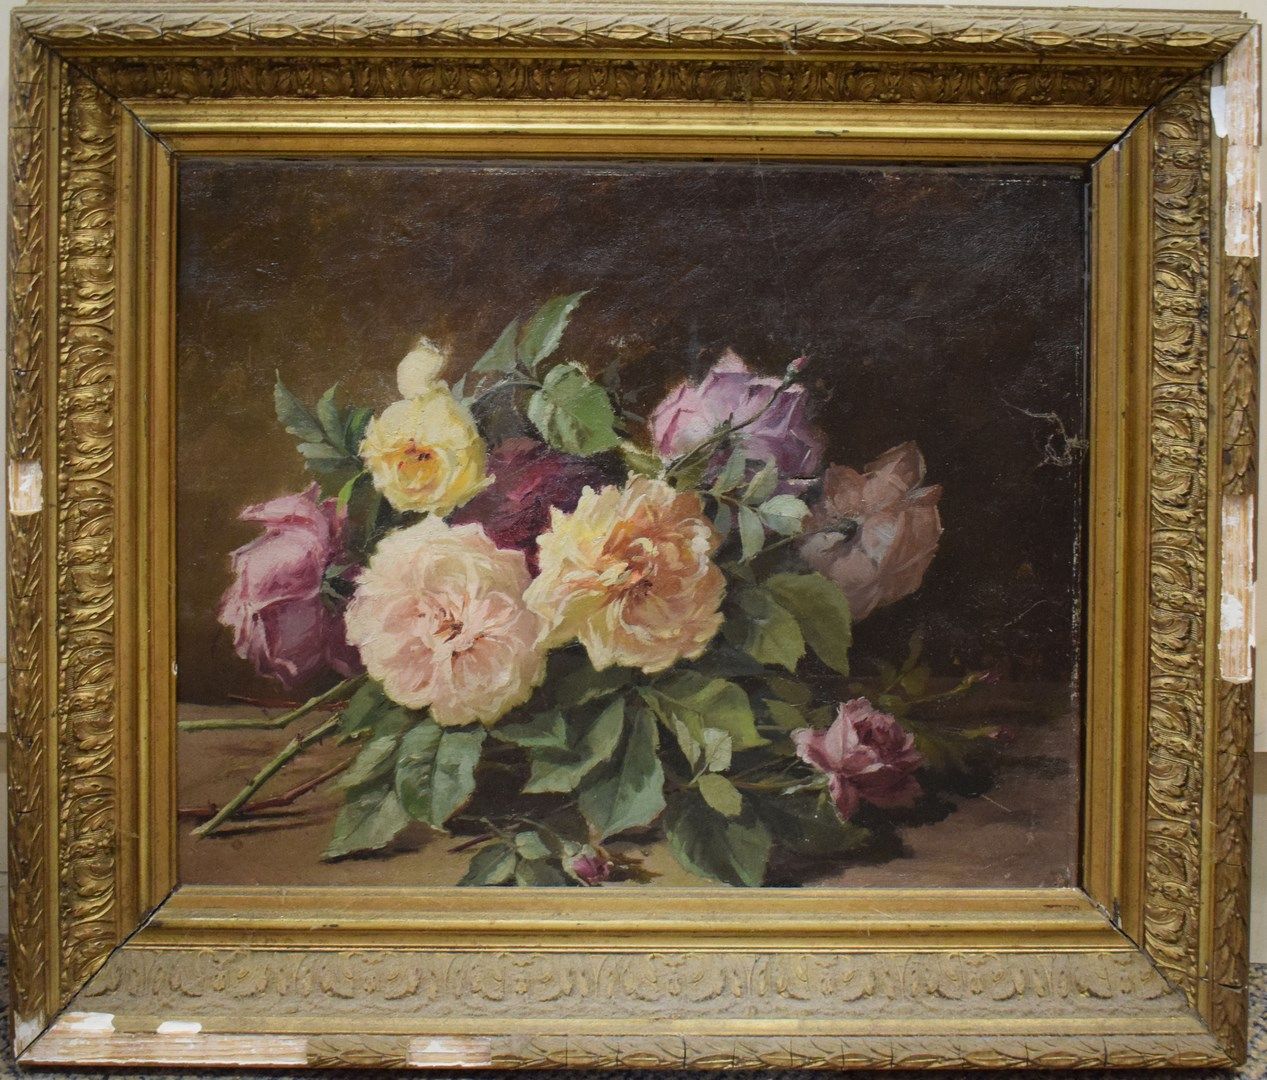 Null XIXth century SCHOOL

Throwing of roses

Oil on canvas